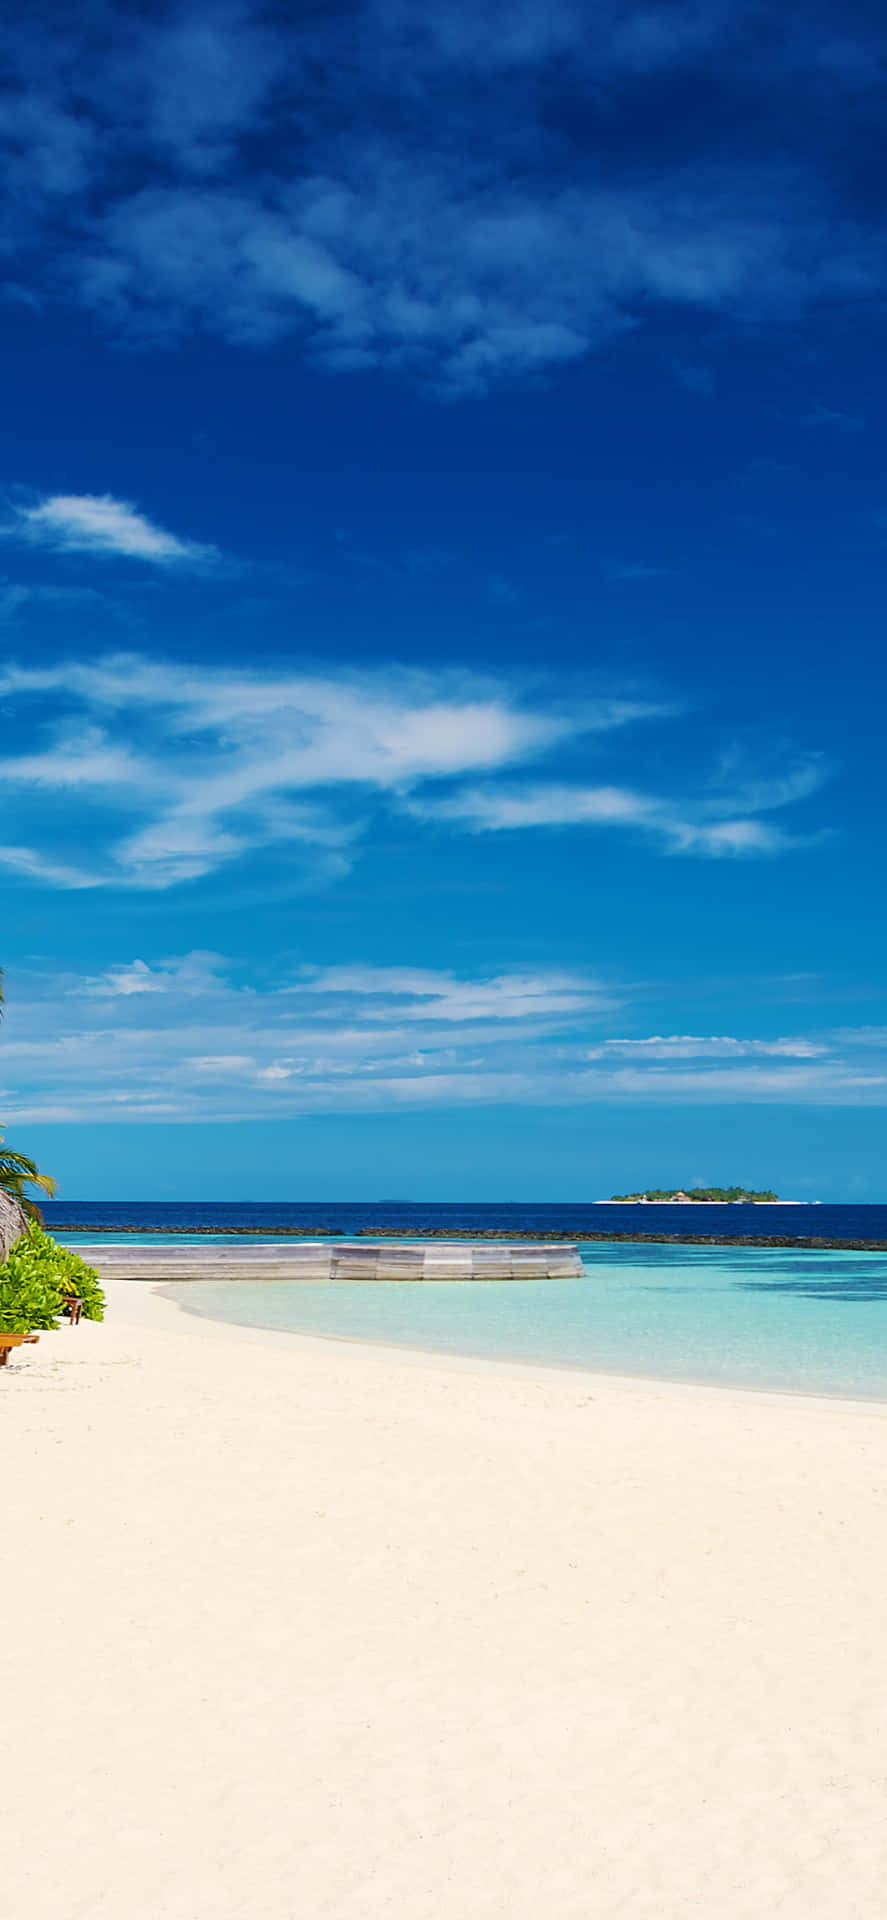 Vacation Paradise: Relax and Unwind on a Beautiful Tropical Island Wallpaper